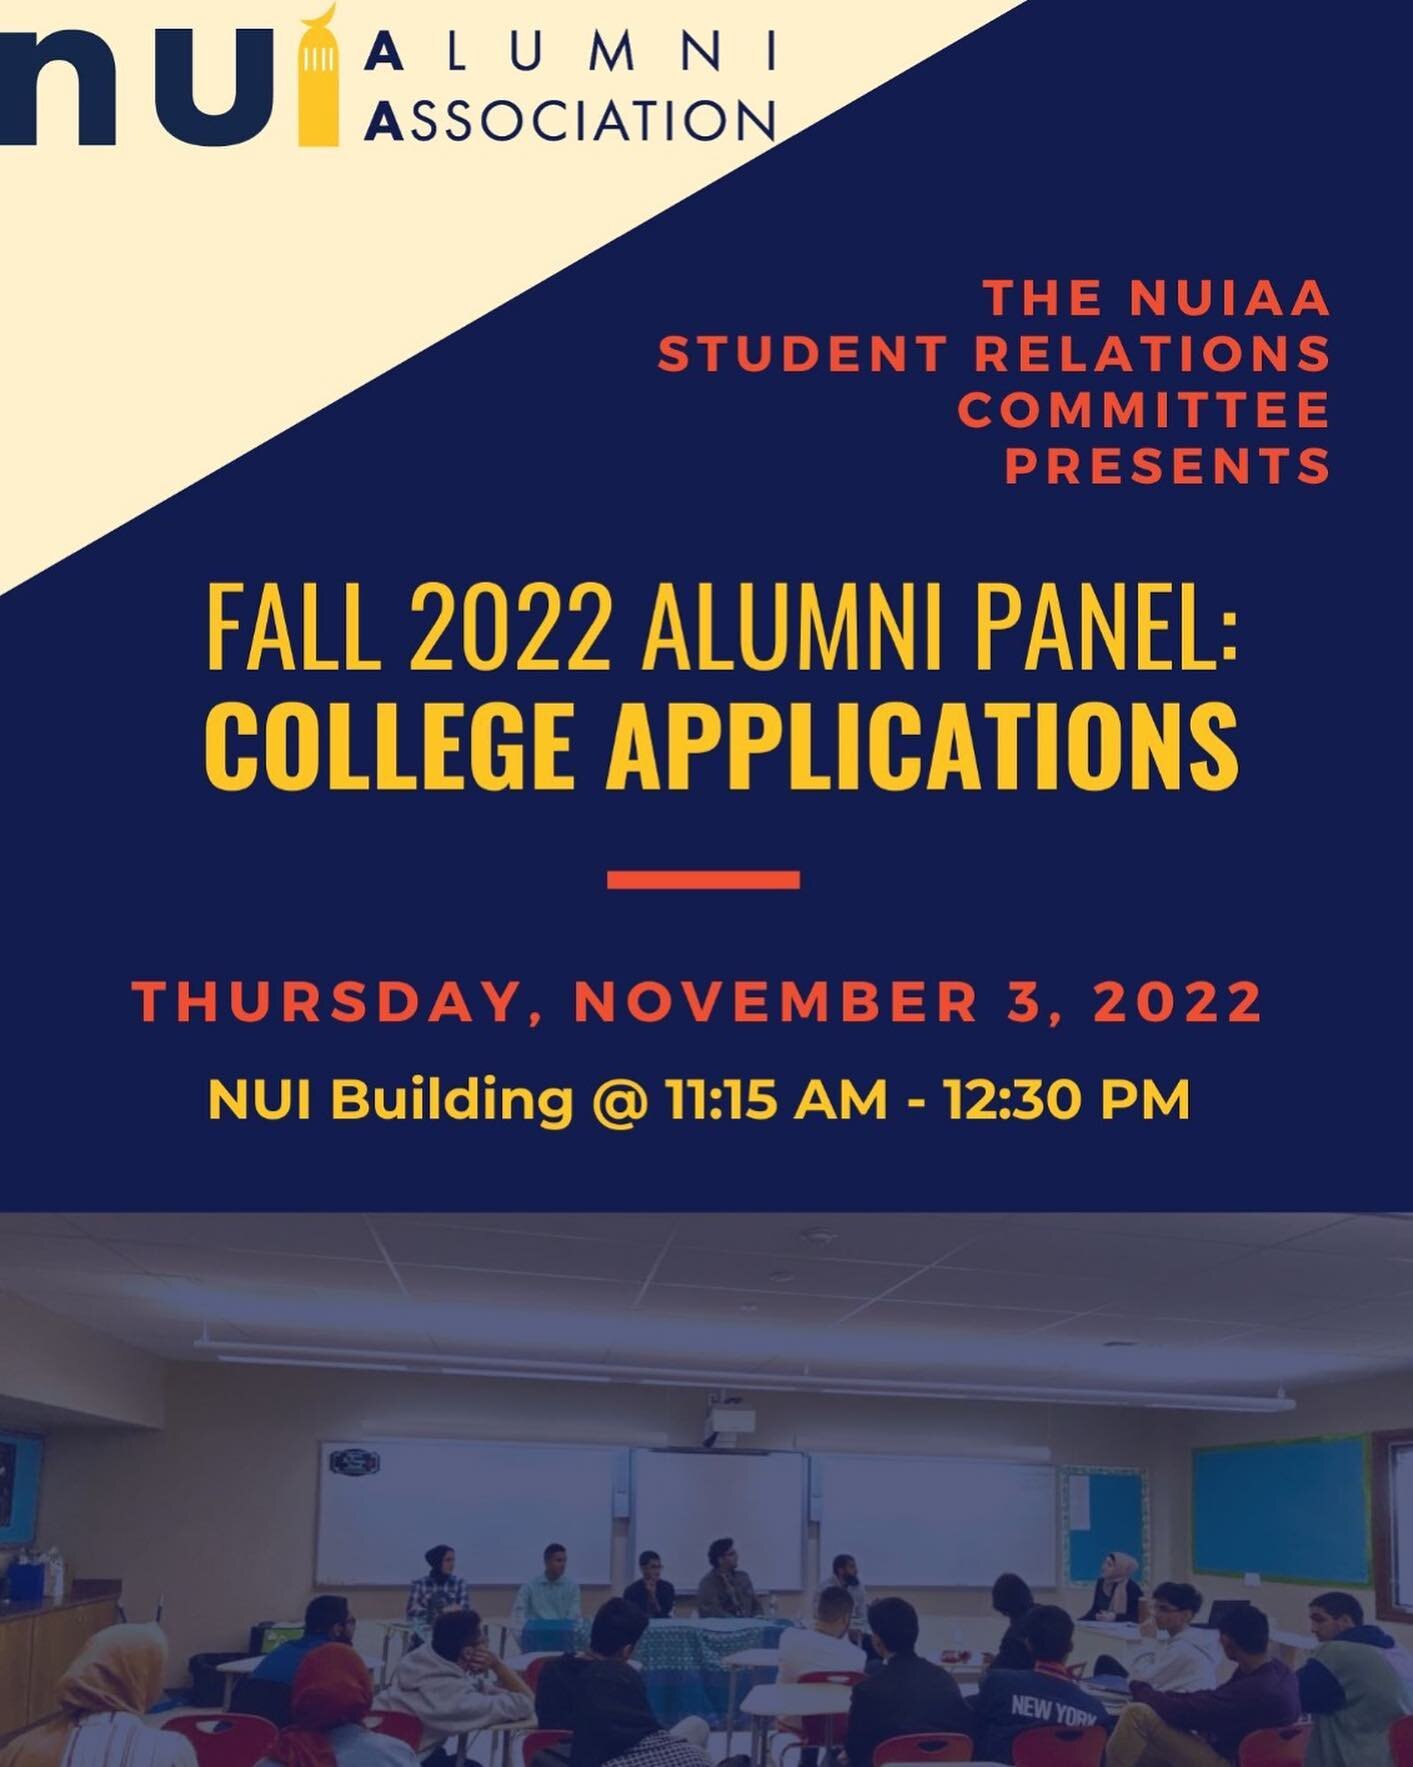 Assalamualaykum, we are seeking alumni panelists for the upcoming NUIAA student relations panel. Please see flyer for details. The event is on Thursday, November 3 from 11:15am-12:30pm, insha'Allah. 

If you are interested please reach out to shfahum